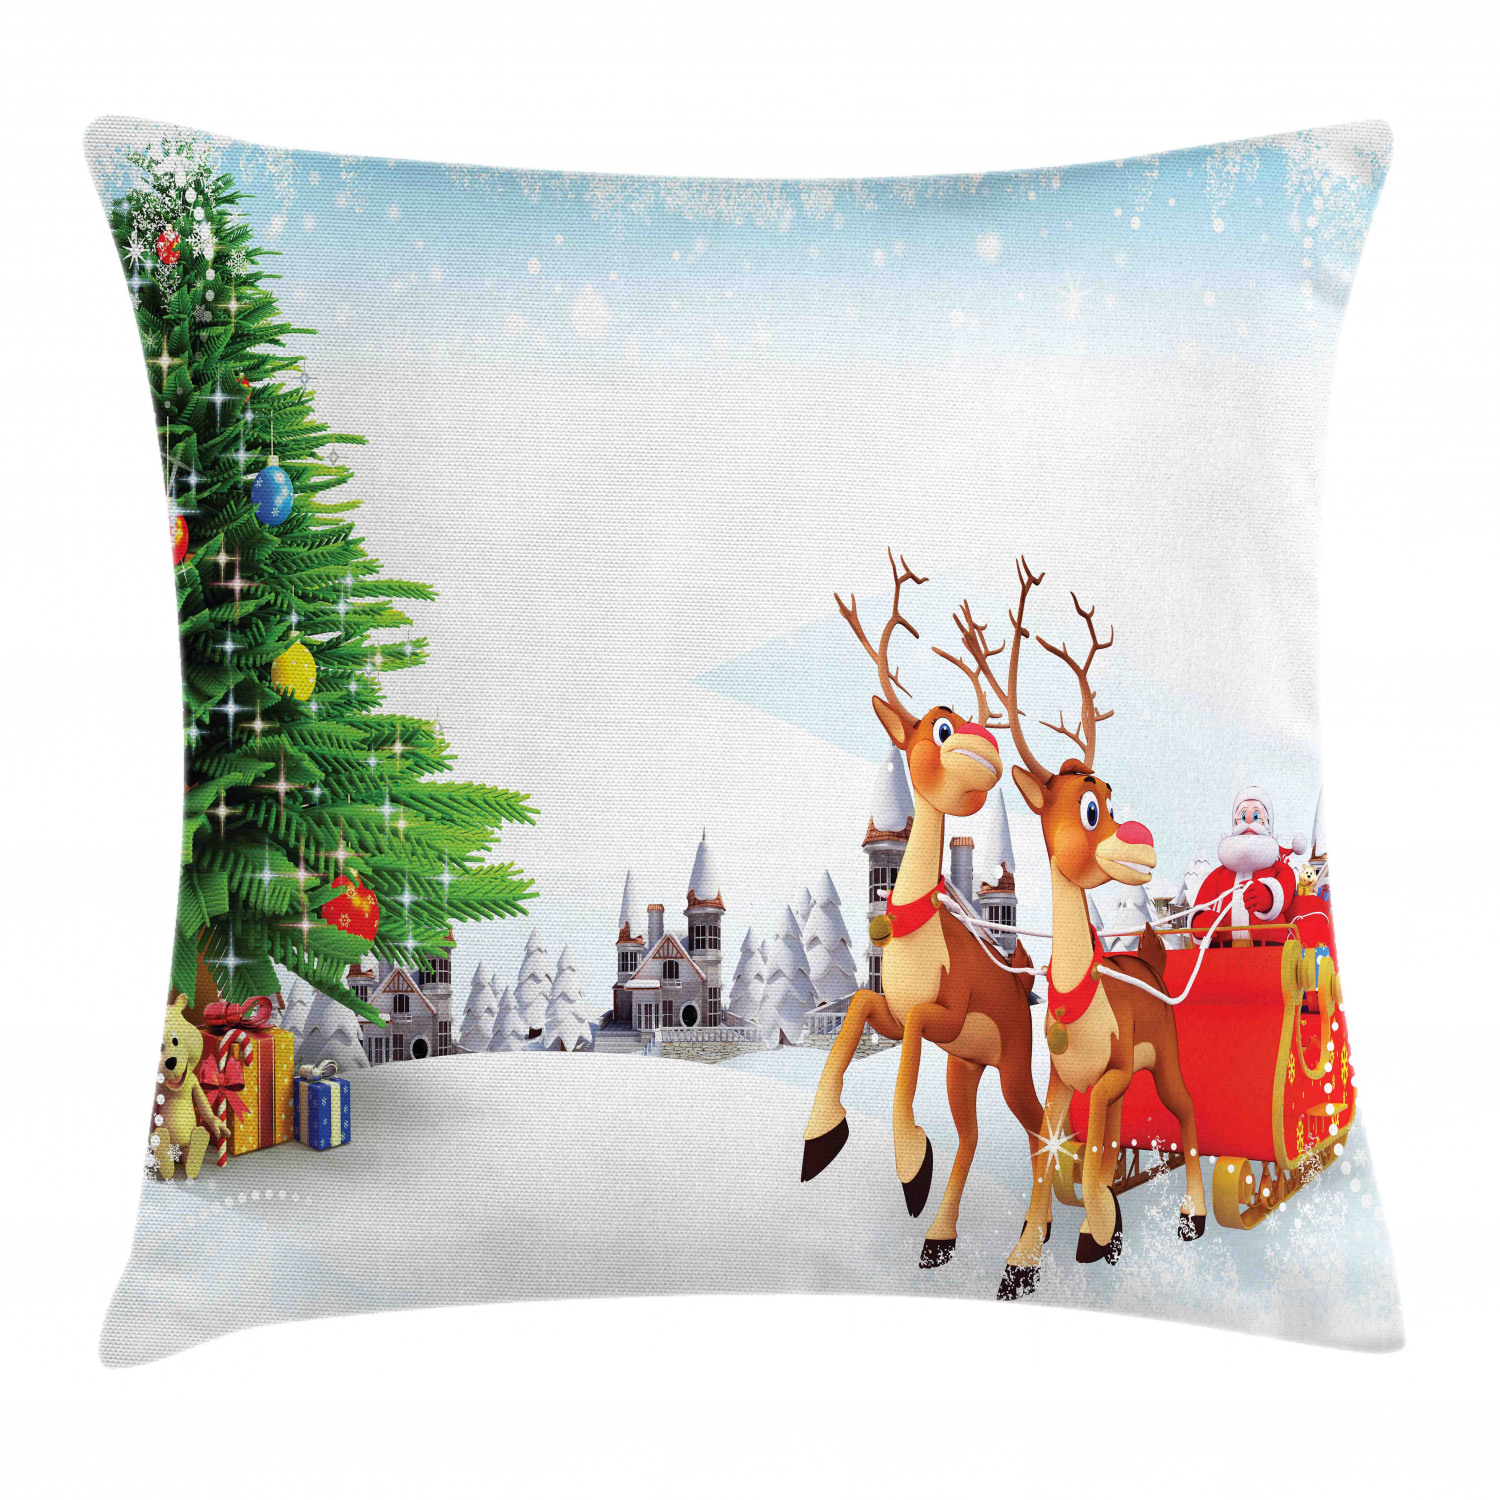 Santa Throw Pillow Cushion Cover, Snow Covered Christmas Village with Cartoon Santa on His Sleigh Big Tree and Boxes, Decorative Square Accent Pillow Case, 18 X 18 Inches, Multicolor, by Ambesonne - image 1 of 2